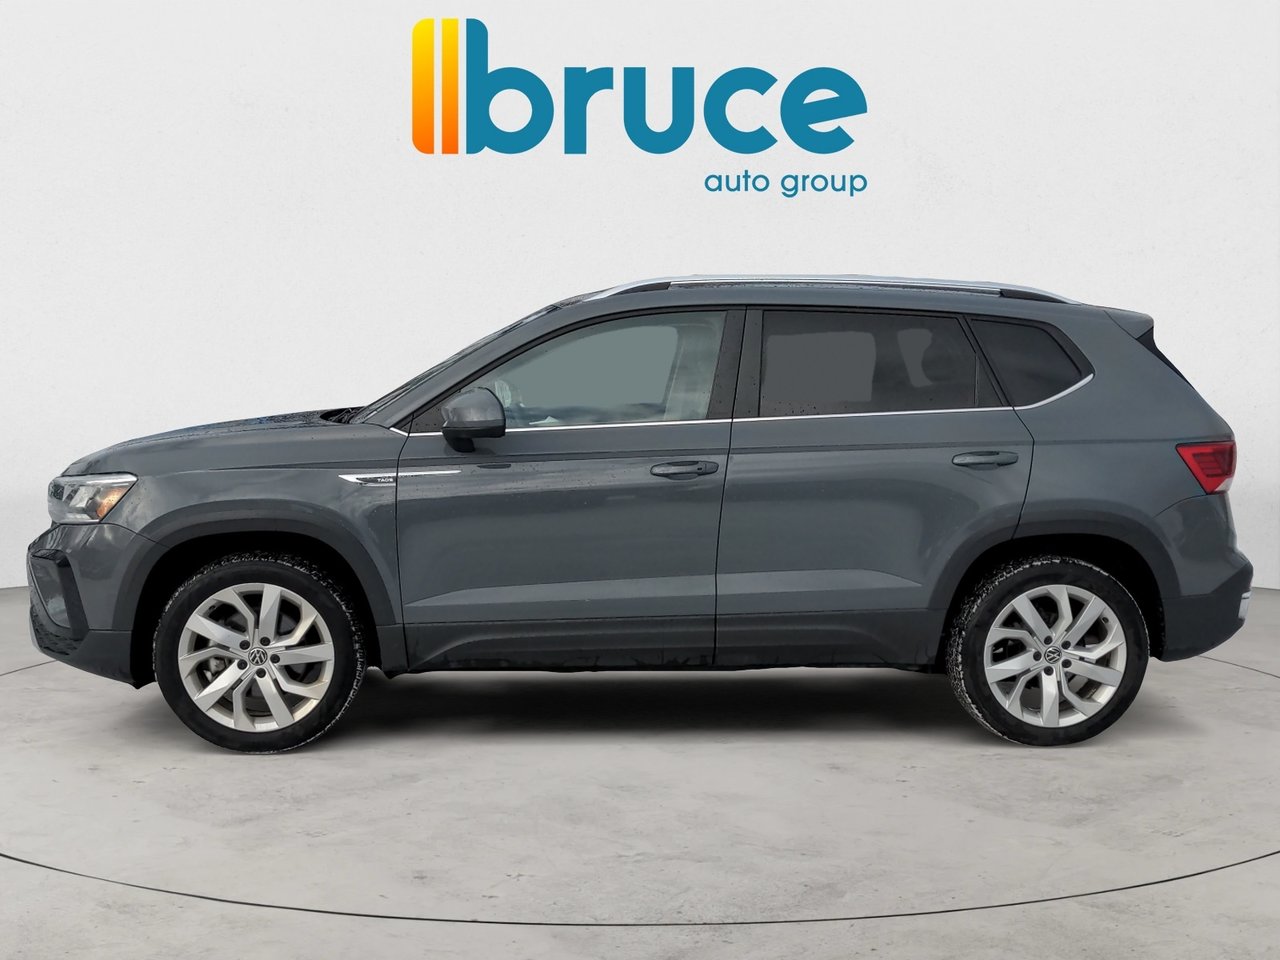 2022 Volkswagen Taos COMFORTLINE (RATES STARTING AT 4.99%) 2YR/40K CERTIFIED ASSURANCE AVAILABLE!